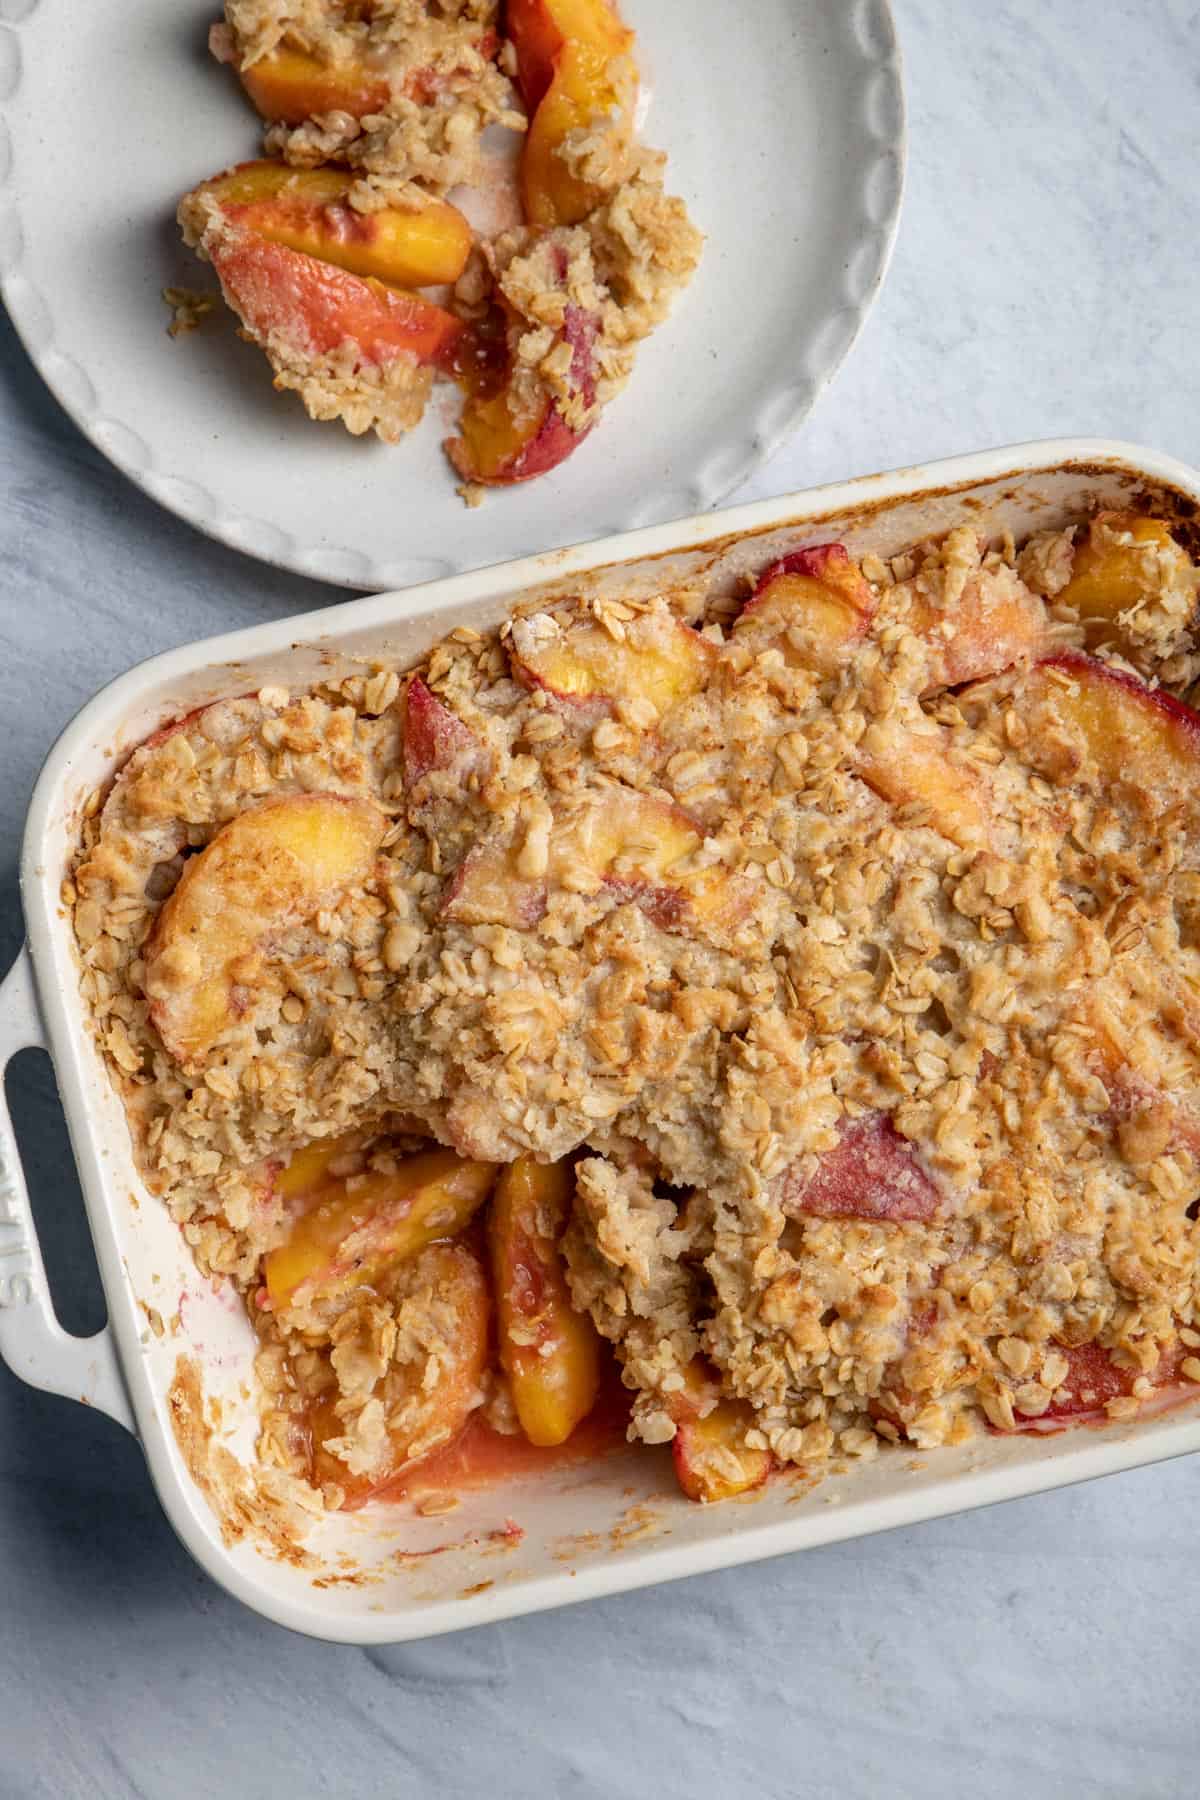 Large baking dish of the peach crisp and some served on the side